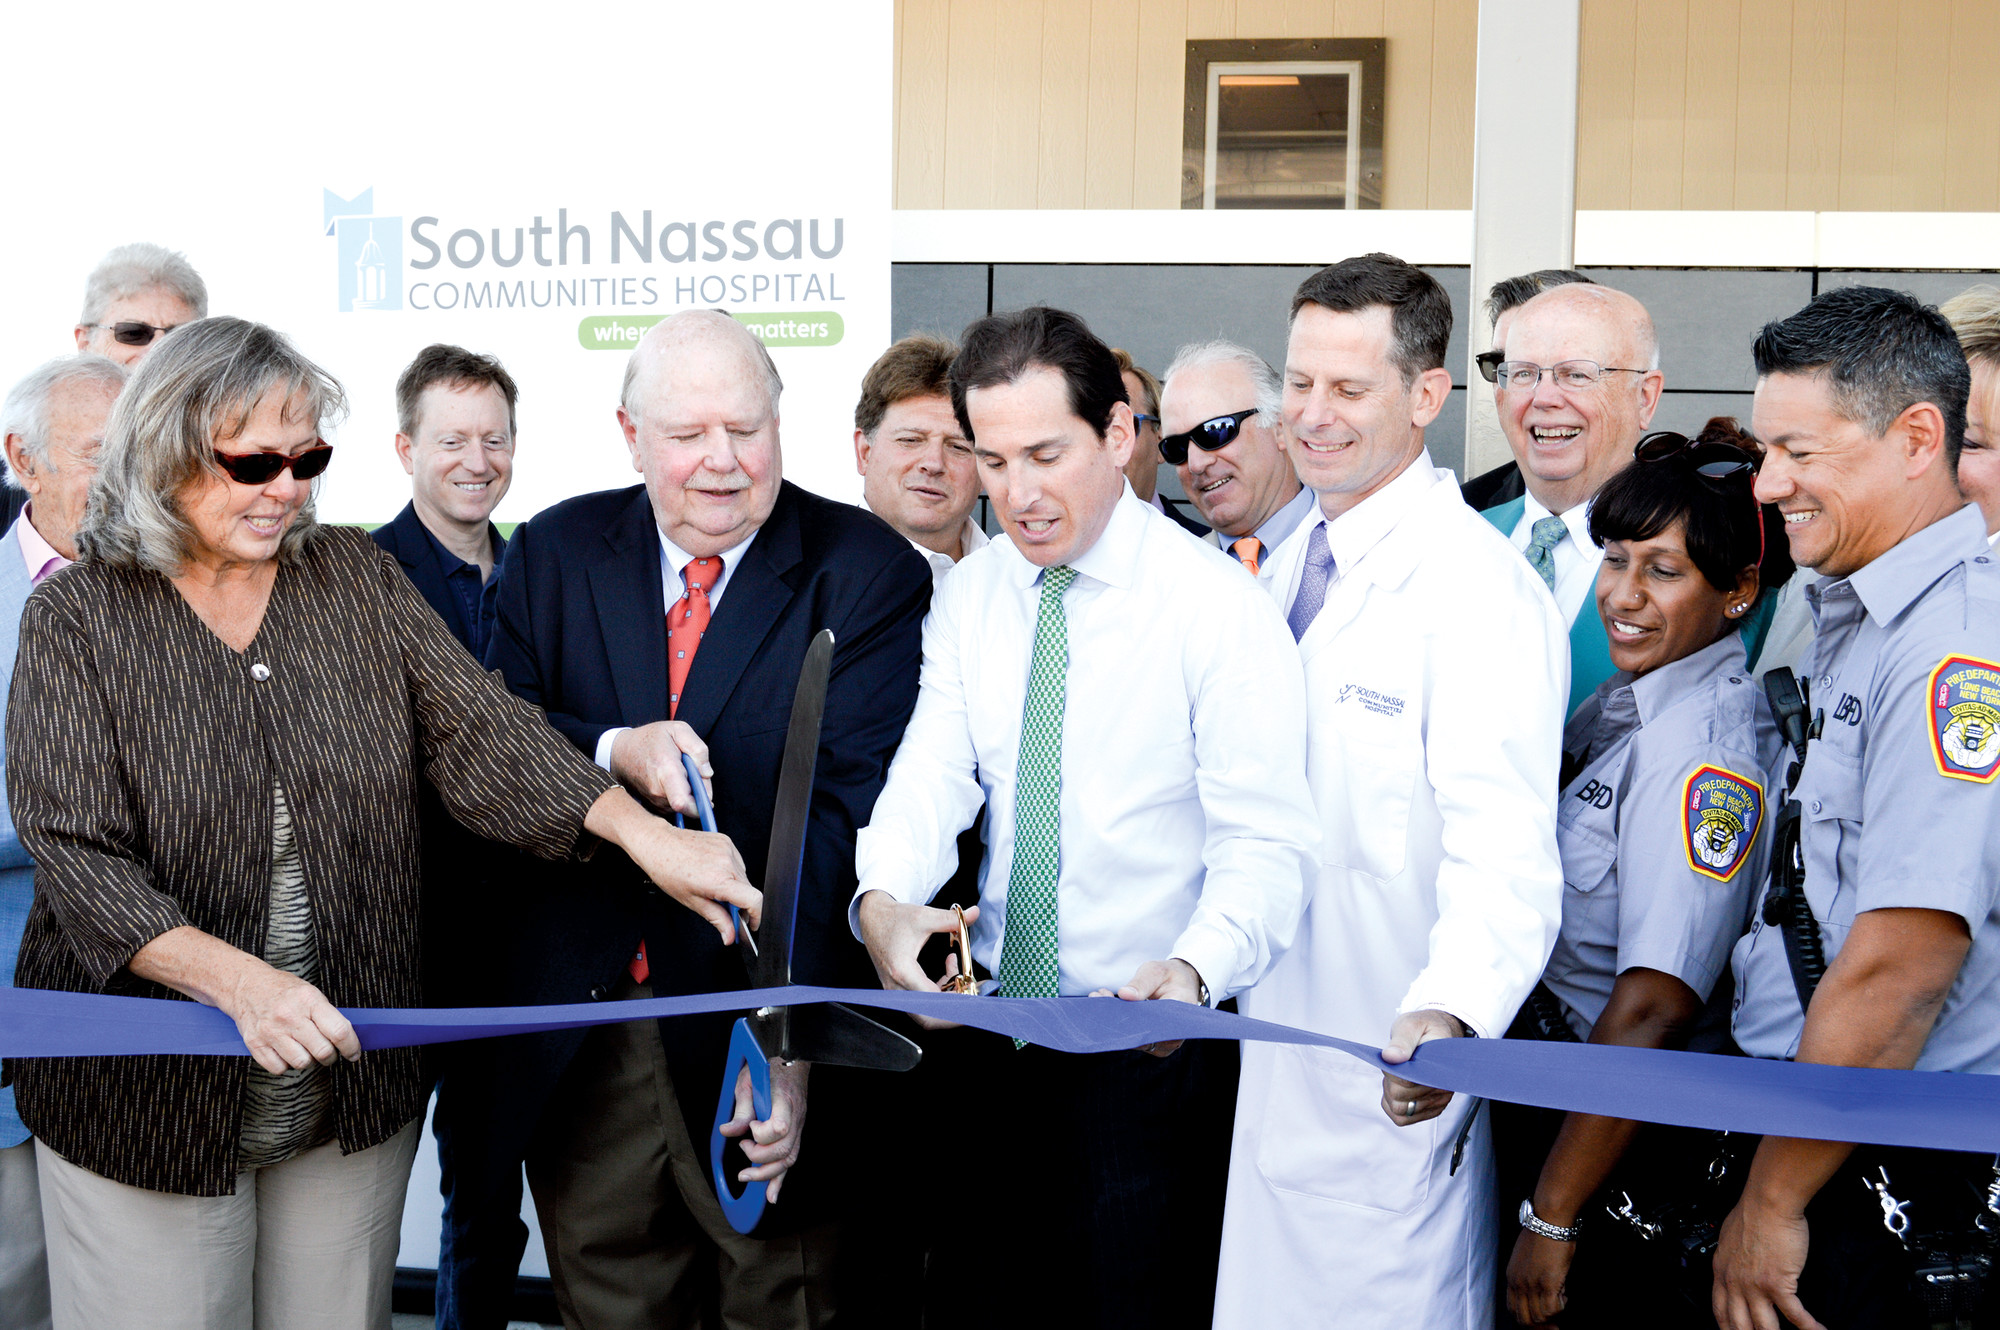 Local officials gathered for a ribbon-cutting ceremony on Monday to mark the opening of South Nassau Communities Hospital’s new free-standing emergency department in Long Beach, the first emergency facility to operate on the barrier island since Hurricane Sandy.